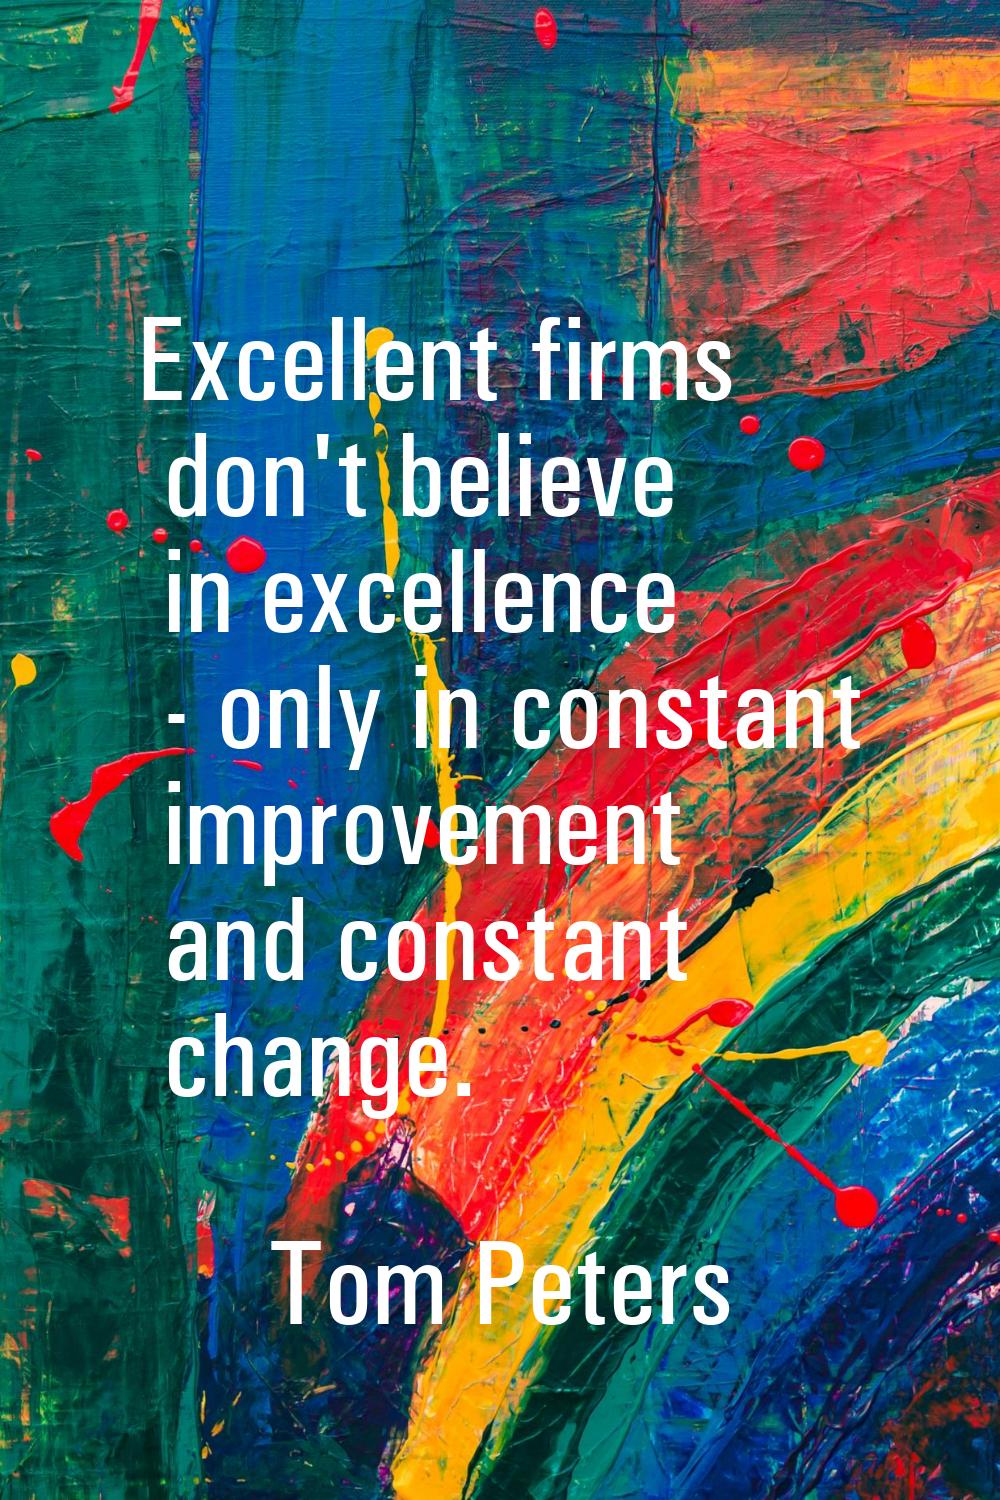 Excellent firms don't believe in excellence - only in constant improvement and constant change.